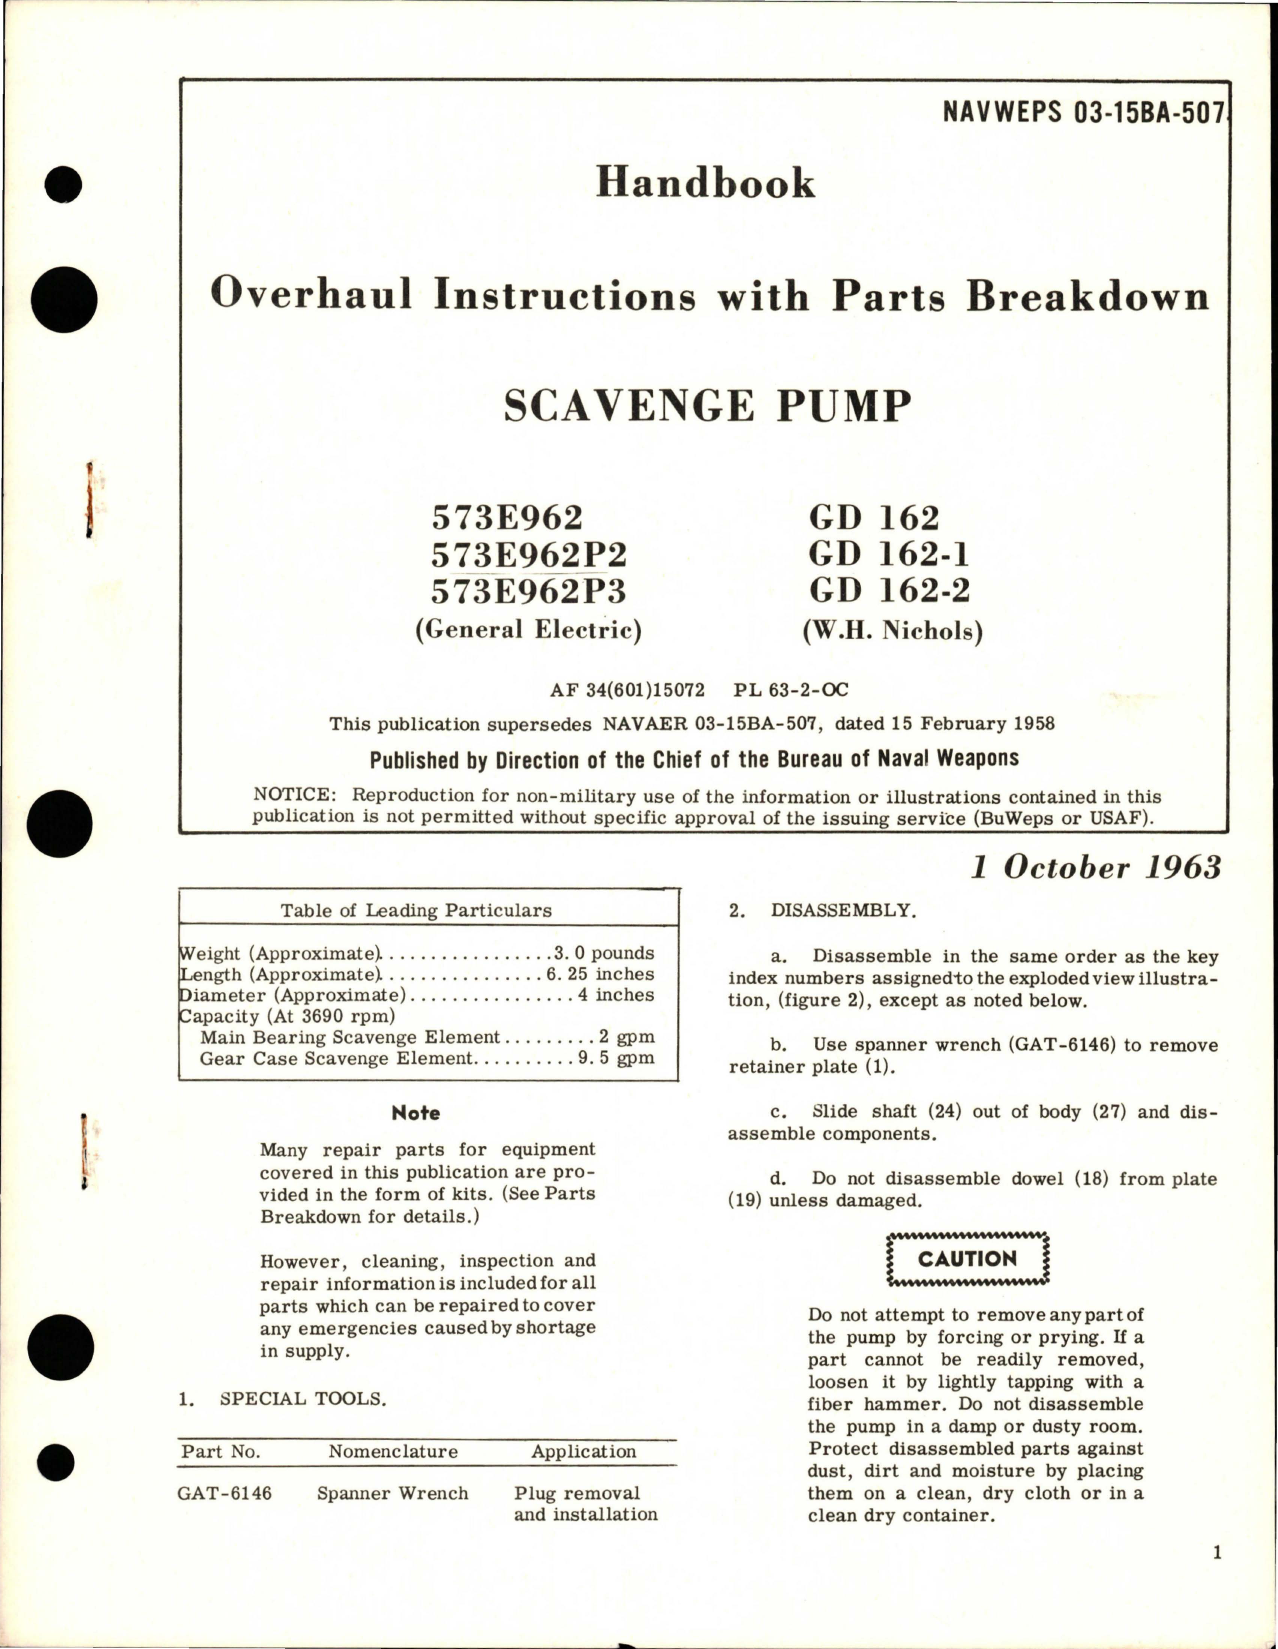 Sample page 1 from AirCorps Library document: Overhaul Instructions with Parts Breakdown for Scavenge Pump 